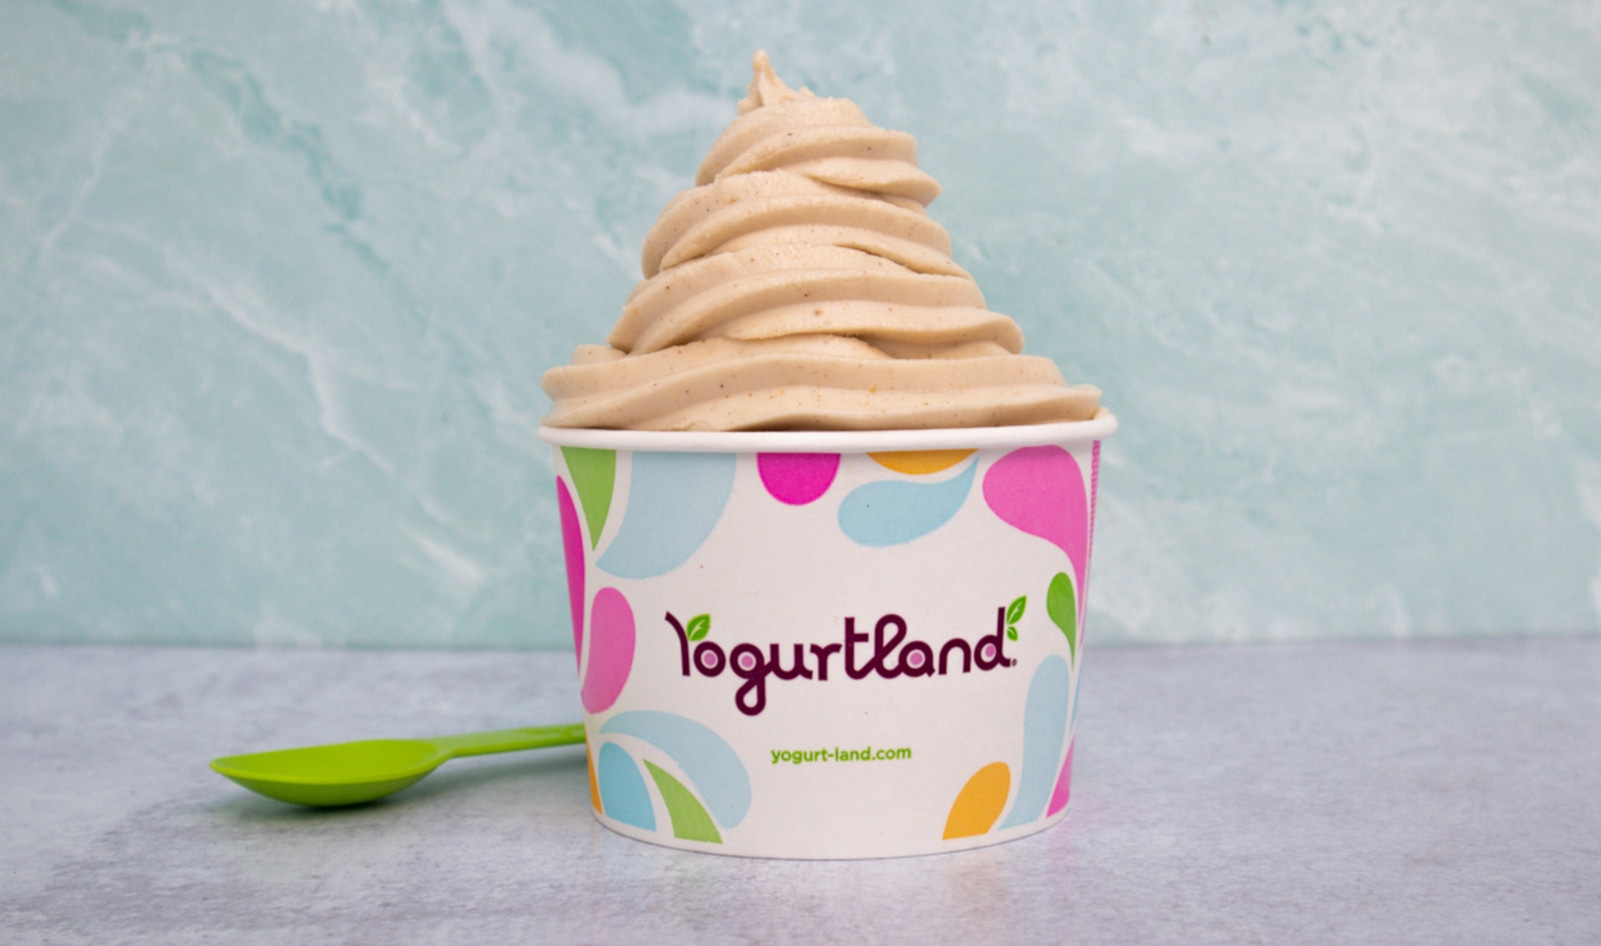 Yogurtland Just Launched Its First Oat Milk Flavor and It Tastes Like Oatmeal Cookies